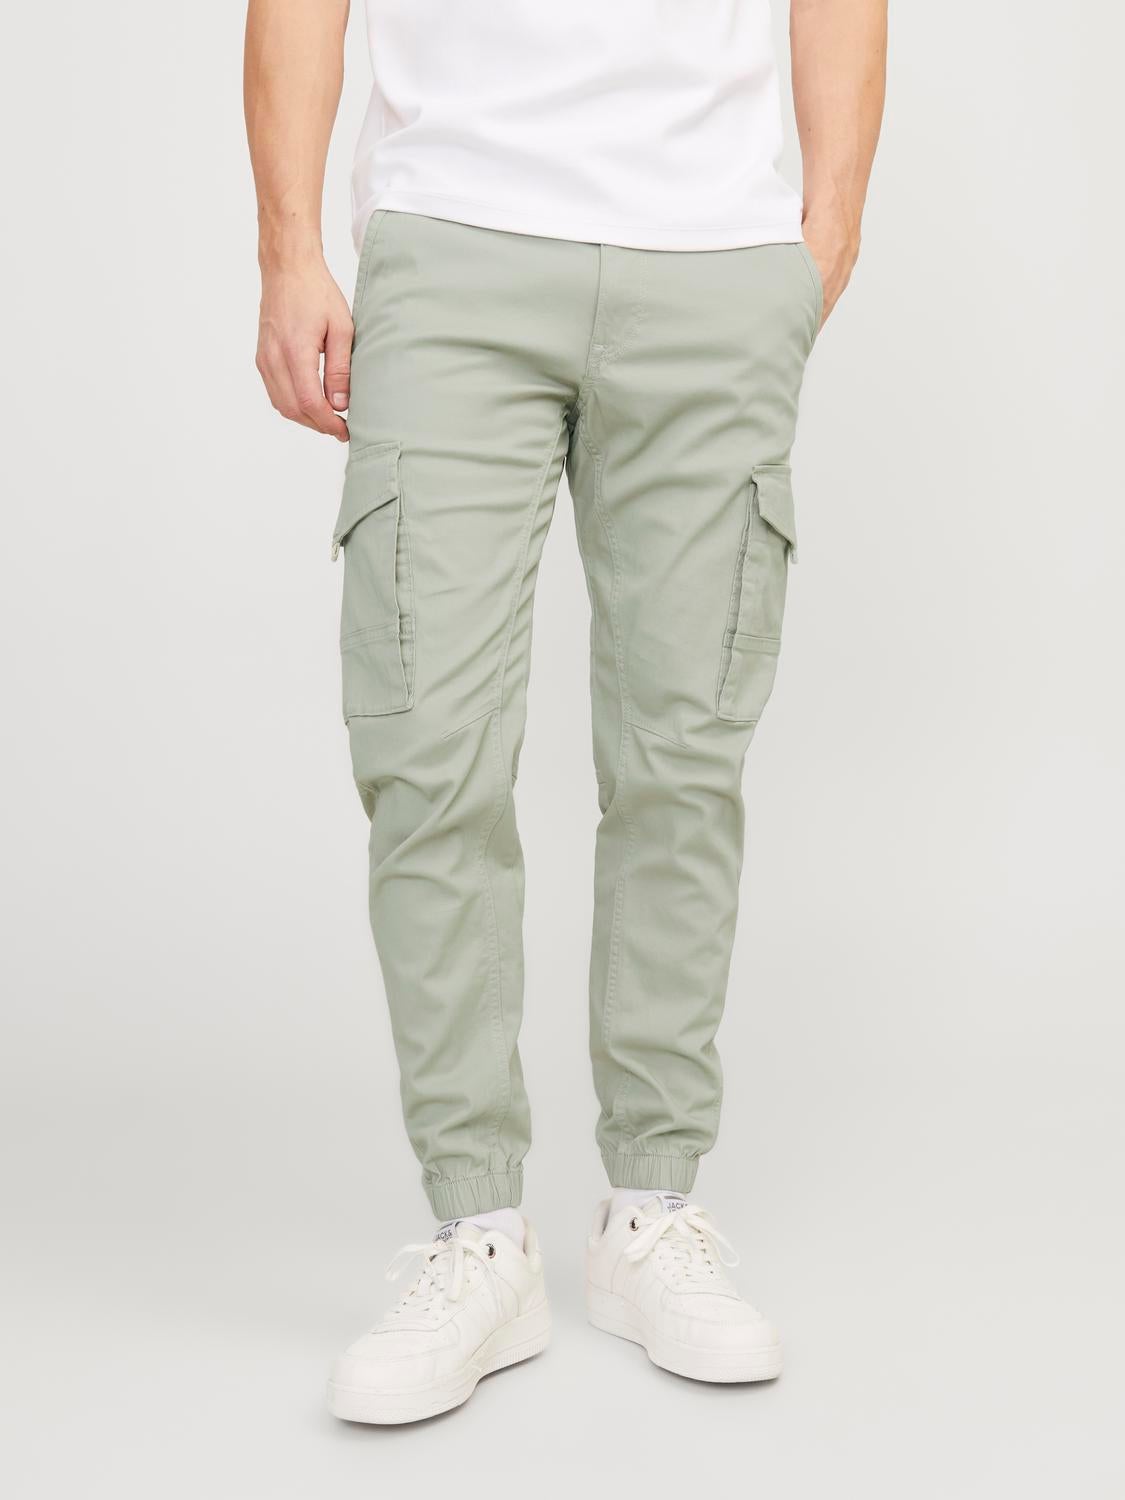 JACK & JONES Tapered Cargo Pants 'Paul Flake' in Black | ABOUT YOU